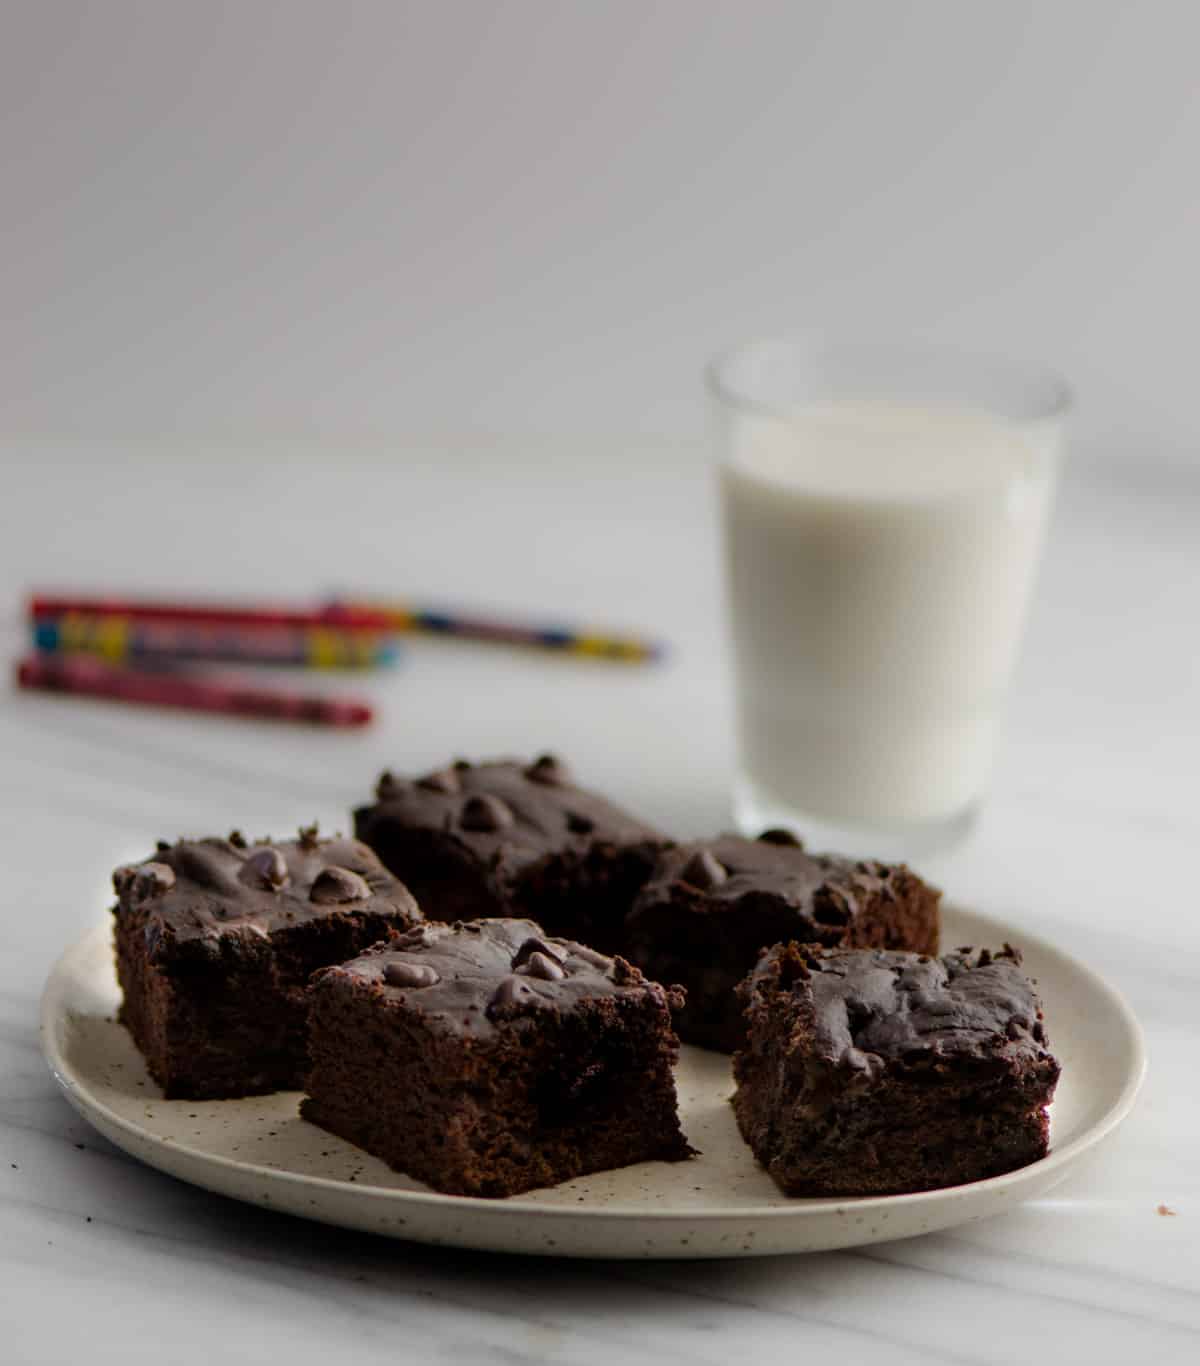 This delicious and moist Chocolate Banana Cake recipe filled with the goodness of coconut oil and banana makes for a healthy after school treat for kids. Make this 30-minute fuss-free cake using a blender.No stand in mixer required.